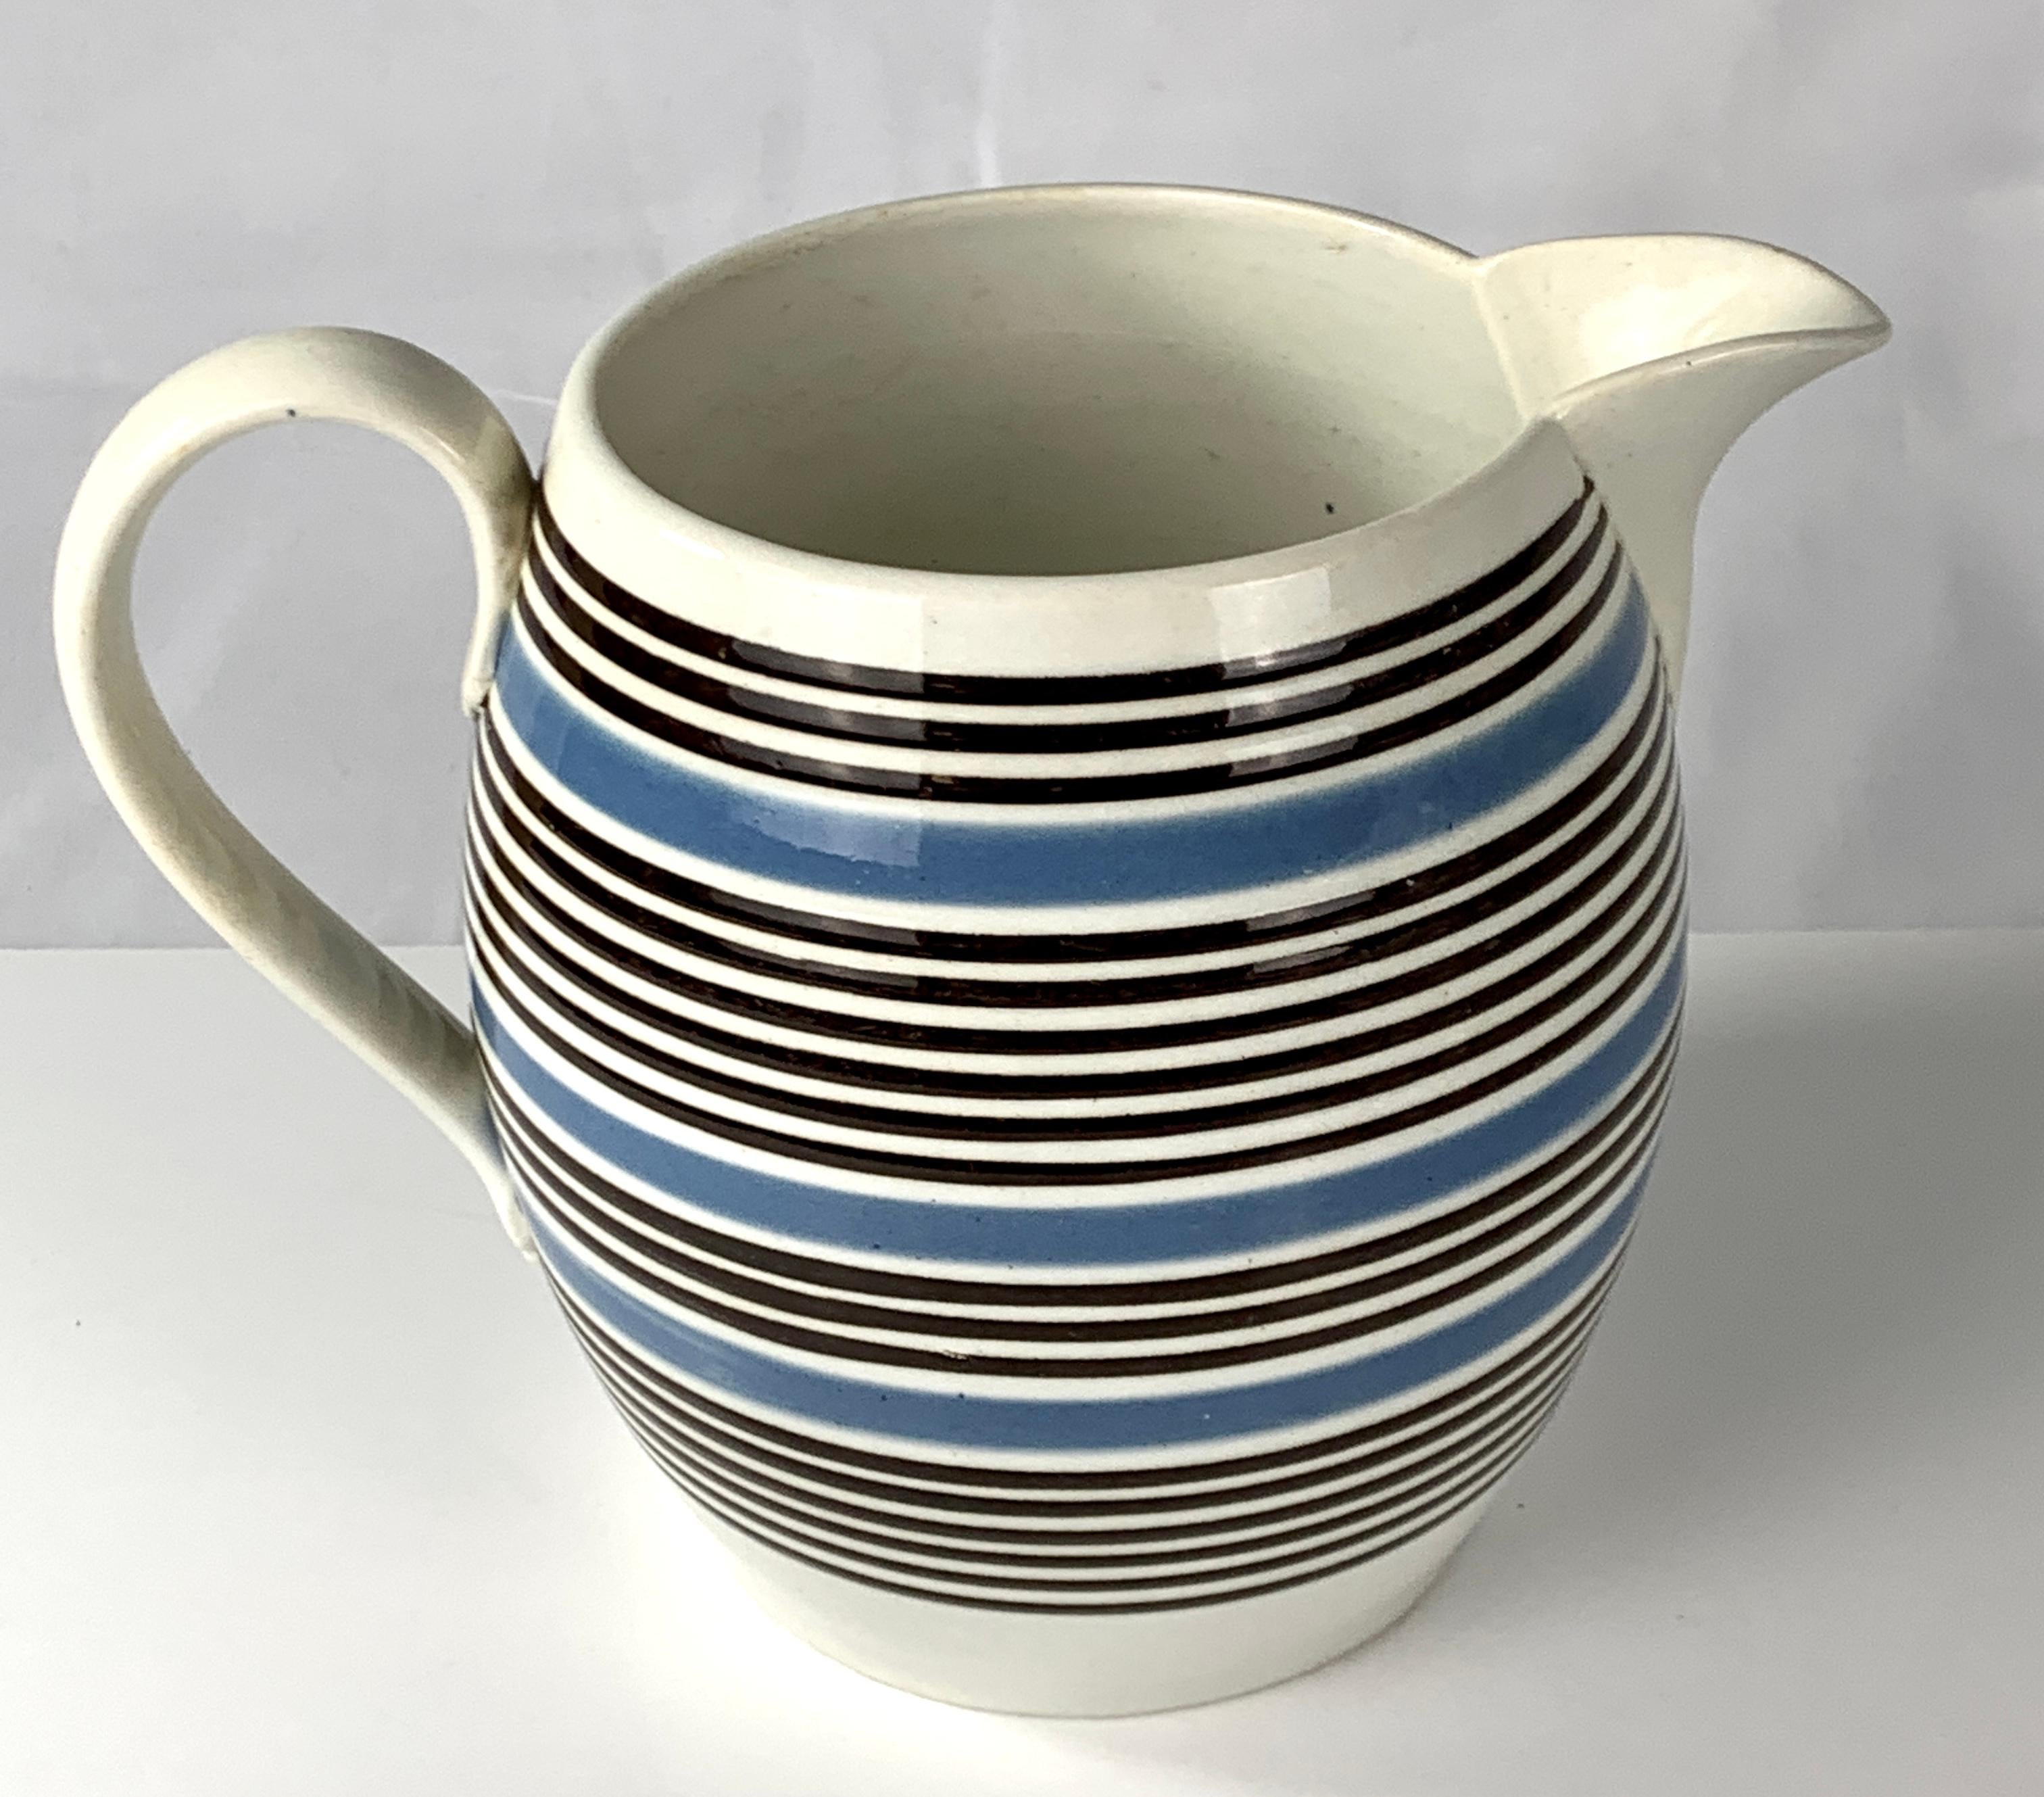 Earthenware Large Mochaware Pitcher Blue and Black Slip Decoration Made England, Circa 1830